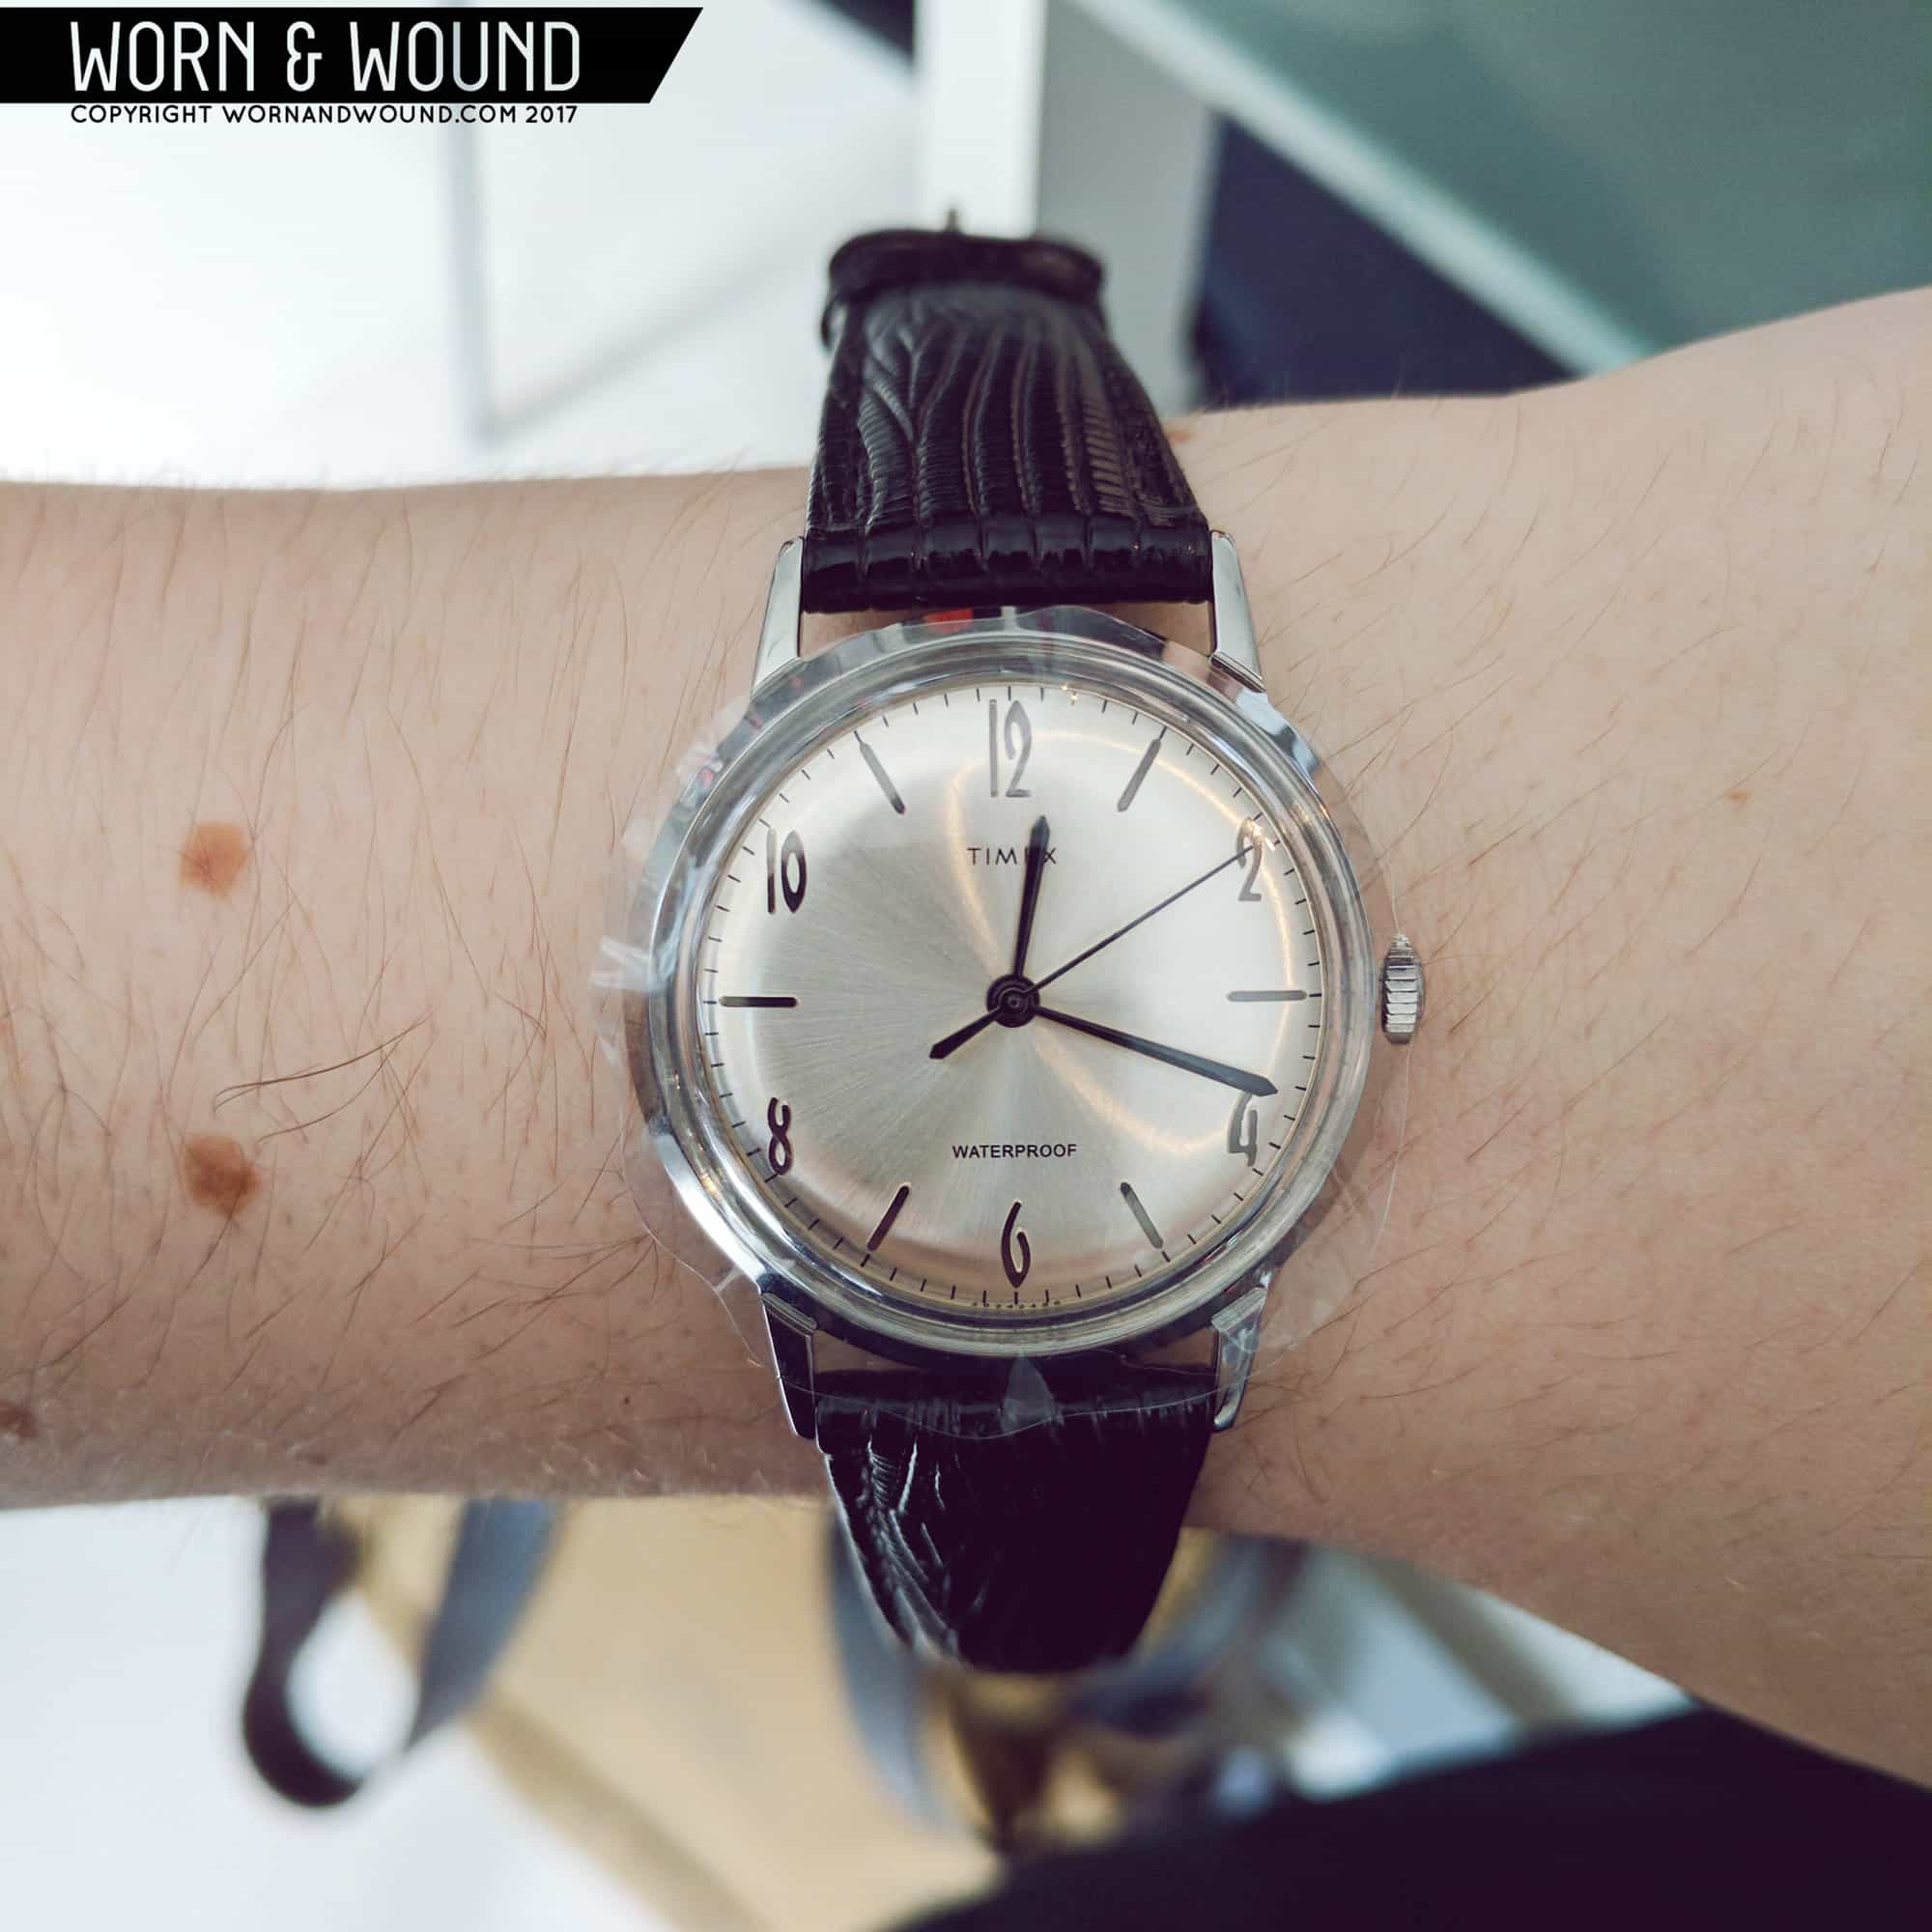 The Worn & Wound Podcast Ep. 37 Timex and Shinola Go Mechanical